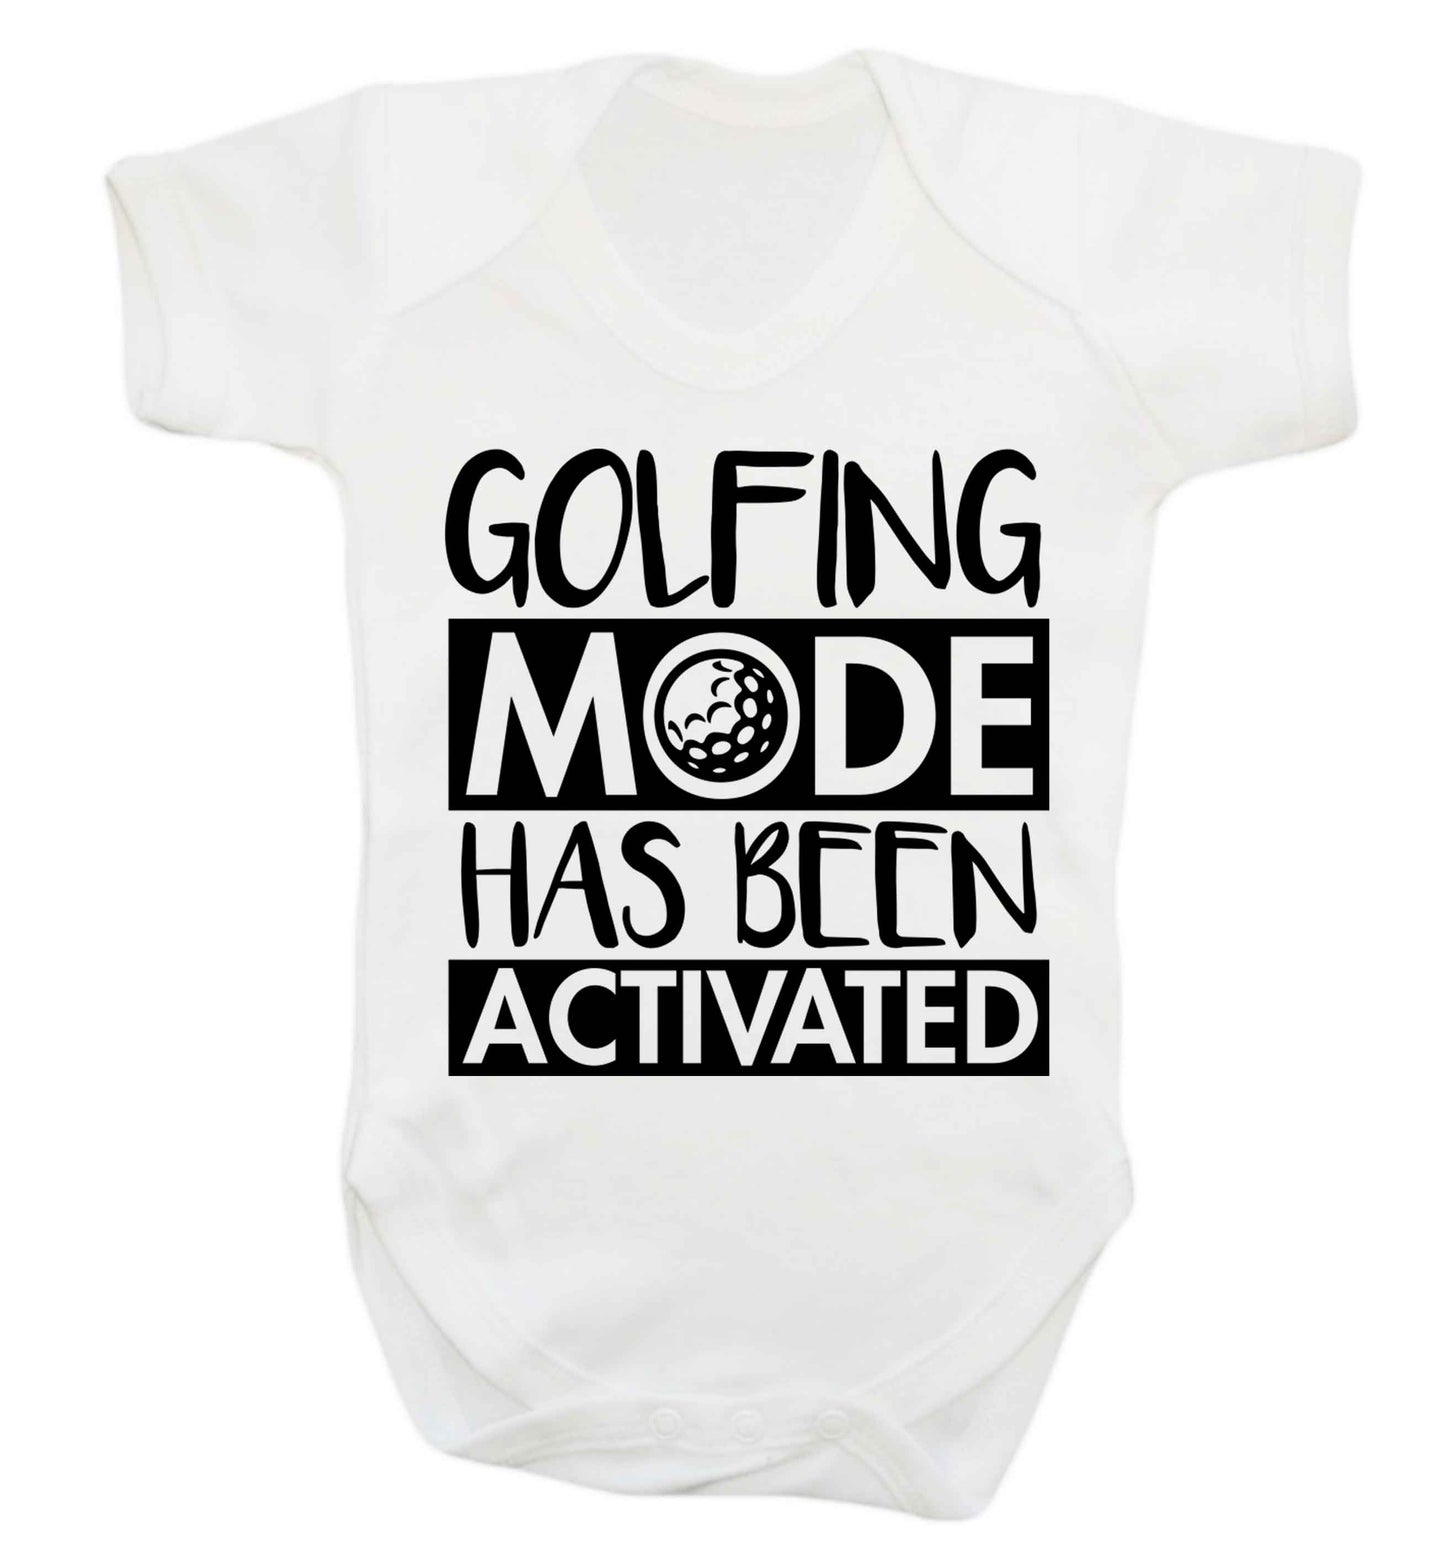 Golfing mode has been activated Baby Vest white 18-24 months